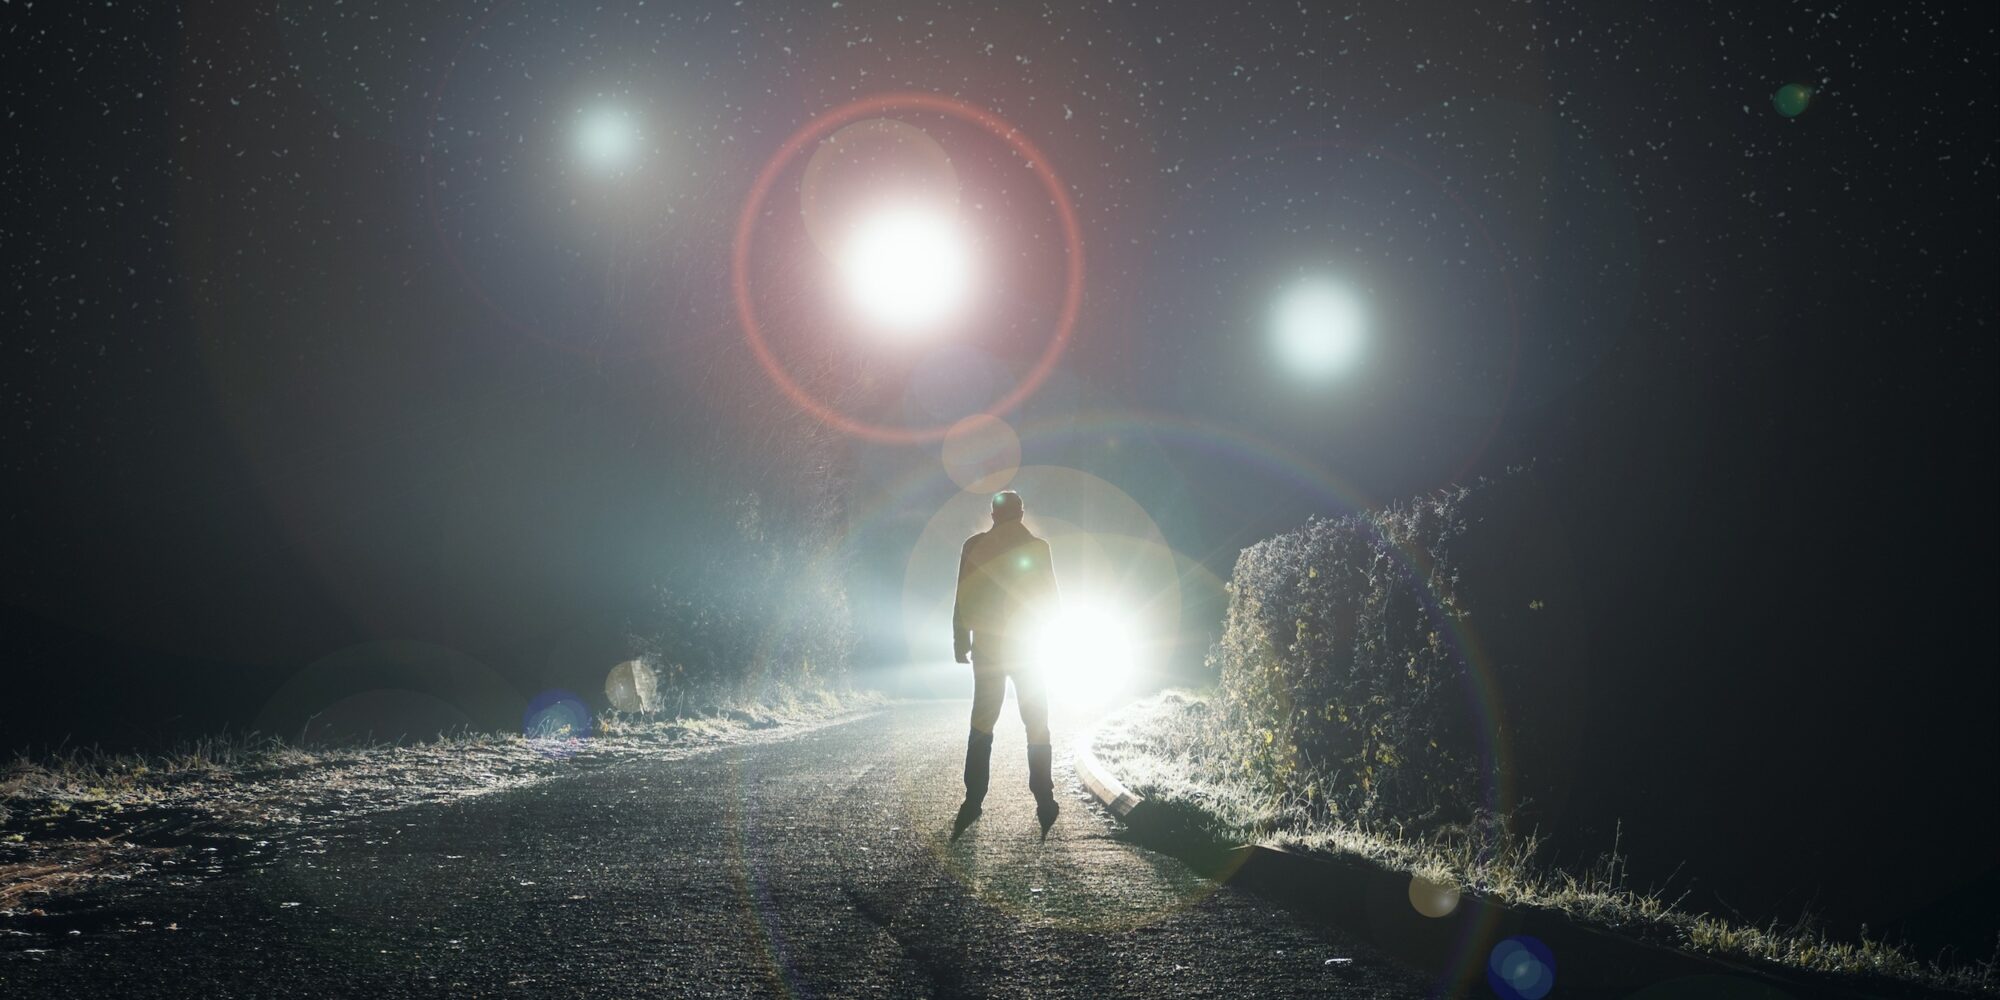 UFO concept. Glowing orbs, floating above a misty road at night. With a silhouetted figure looking at the lights.